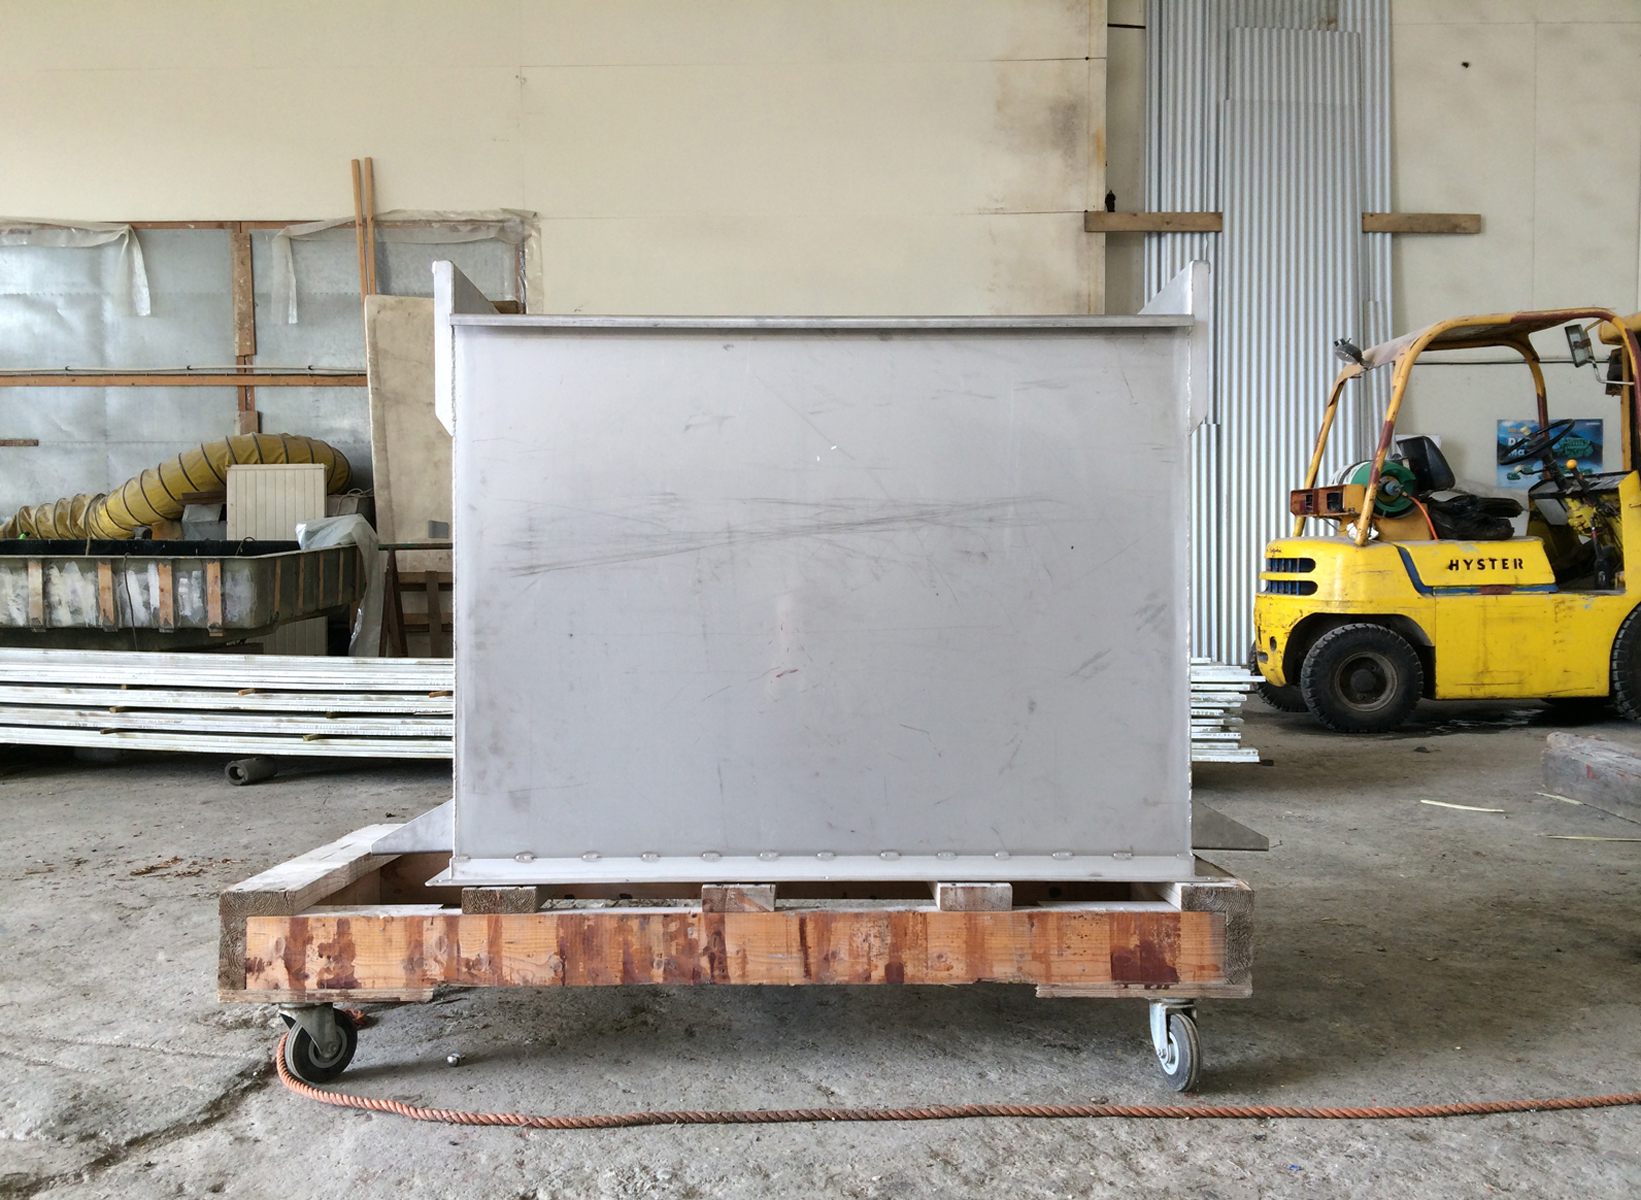 A bare aluminum box sits on a pallet dolly in a warehouse with a yellow forklift.